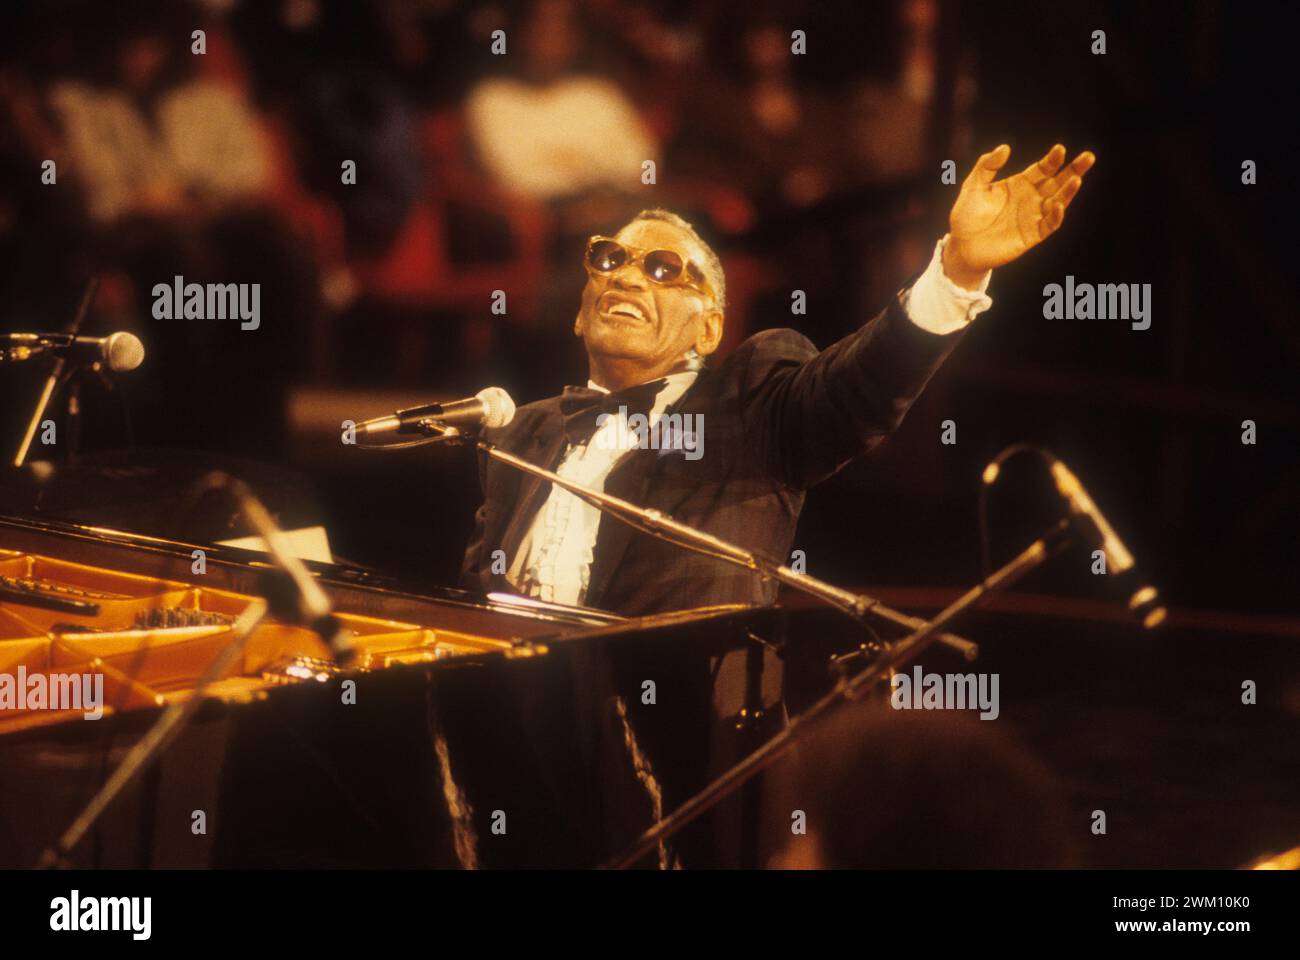 3824396 Festival di Sanremo 1990 Ray Charles; (add.info.: Sanremo Music Festival 1990. American singer-songwriter Ray Charles performing / Festival di Sanremo 1990. Il cantante Ray Charles); © Marcello Mencarini. All rights reserved 2024. Stock Photo